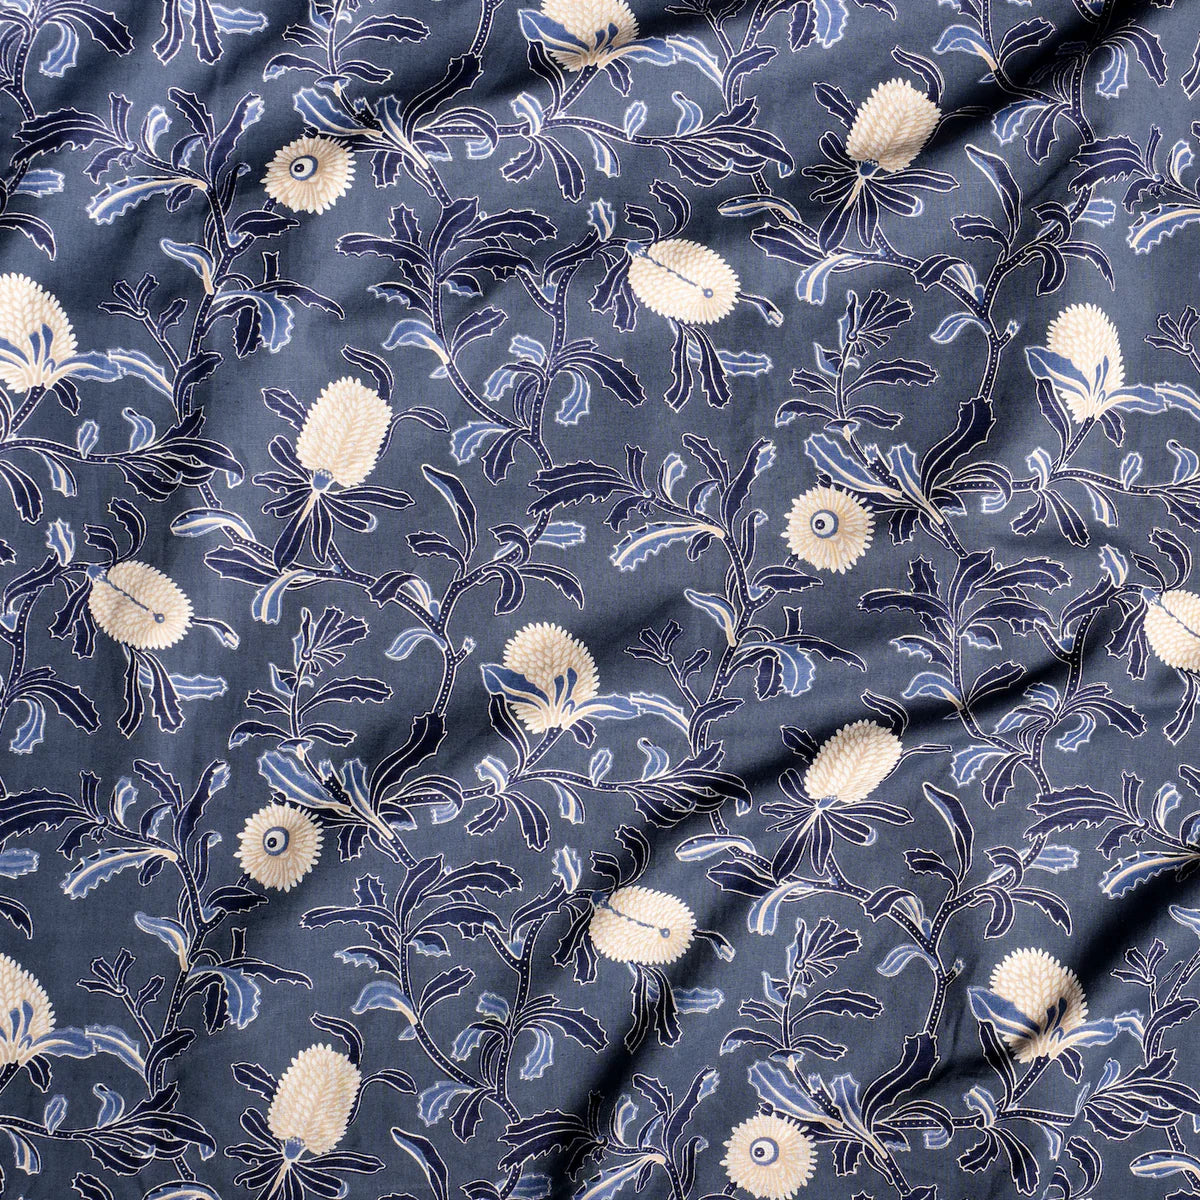 Draped fabric in a floral print in shades of navy and tan on a navy field.